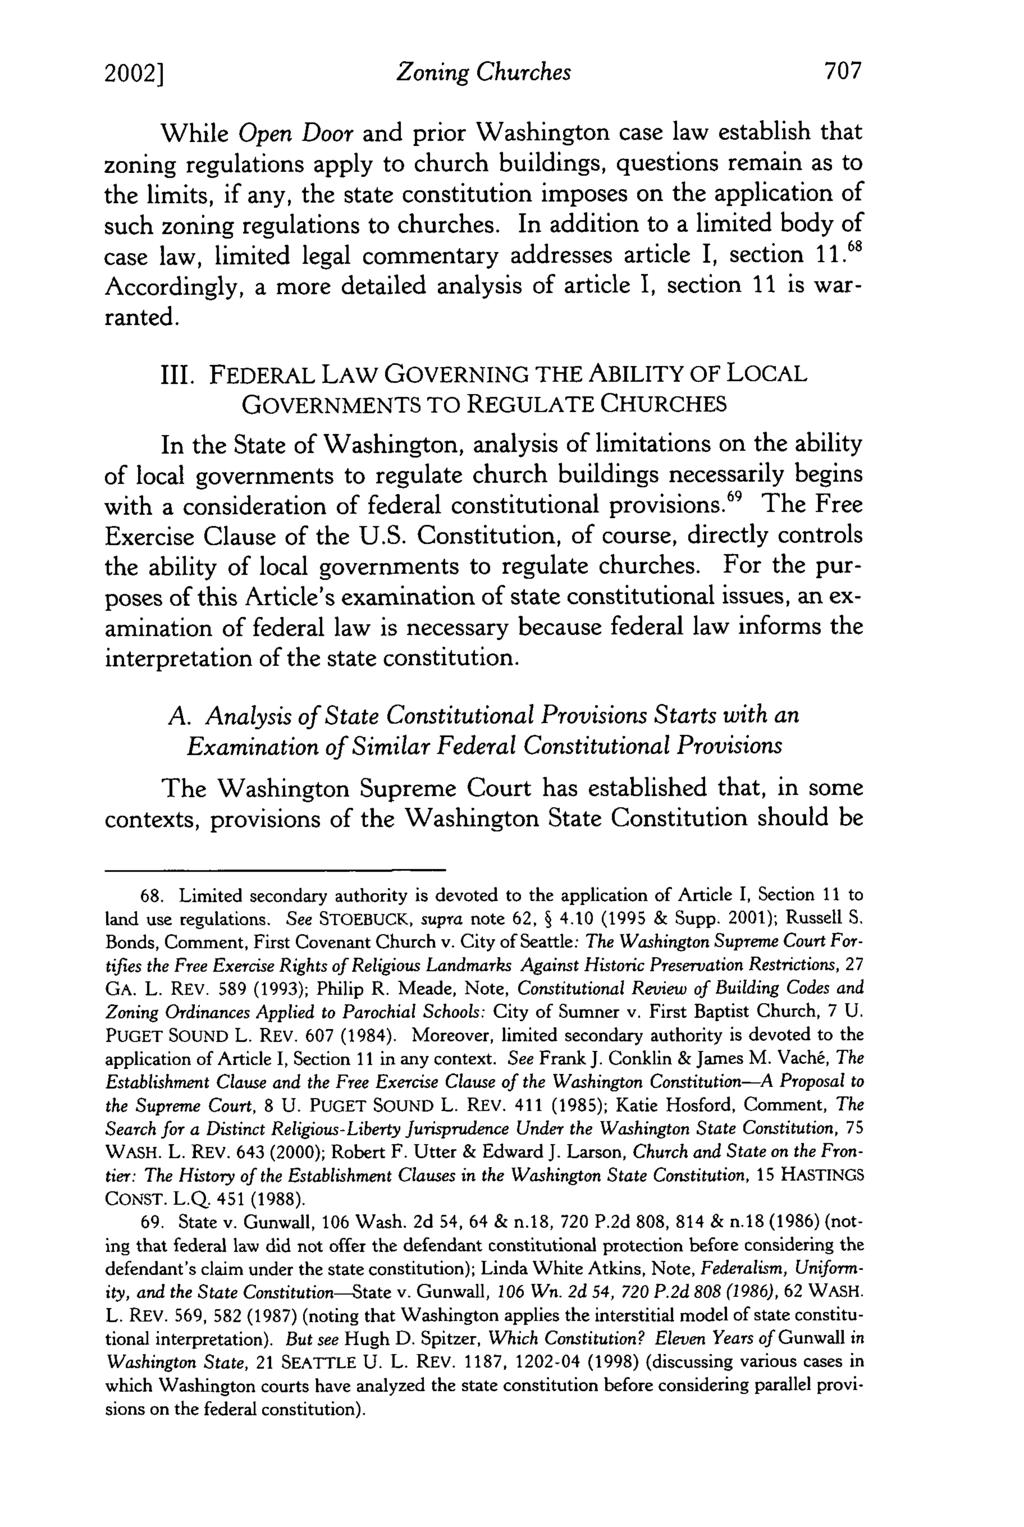 2002] Zoning Churches While Open Door and prior Washington case law establish that zoning regulations apply to church buildings, questions remain as to the limits, if any, the state constitution